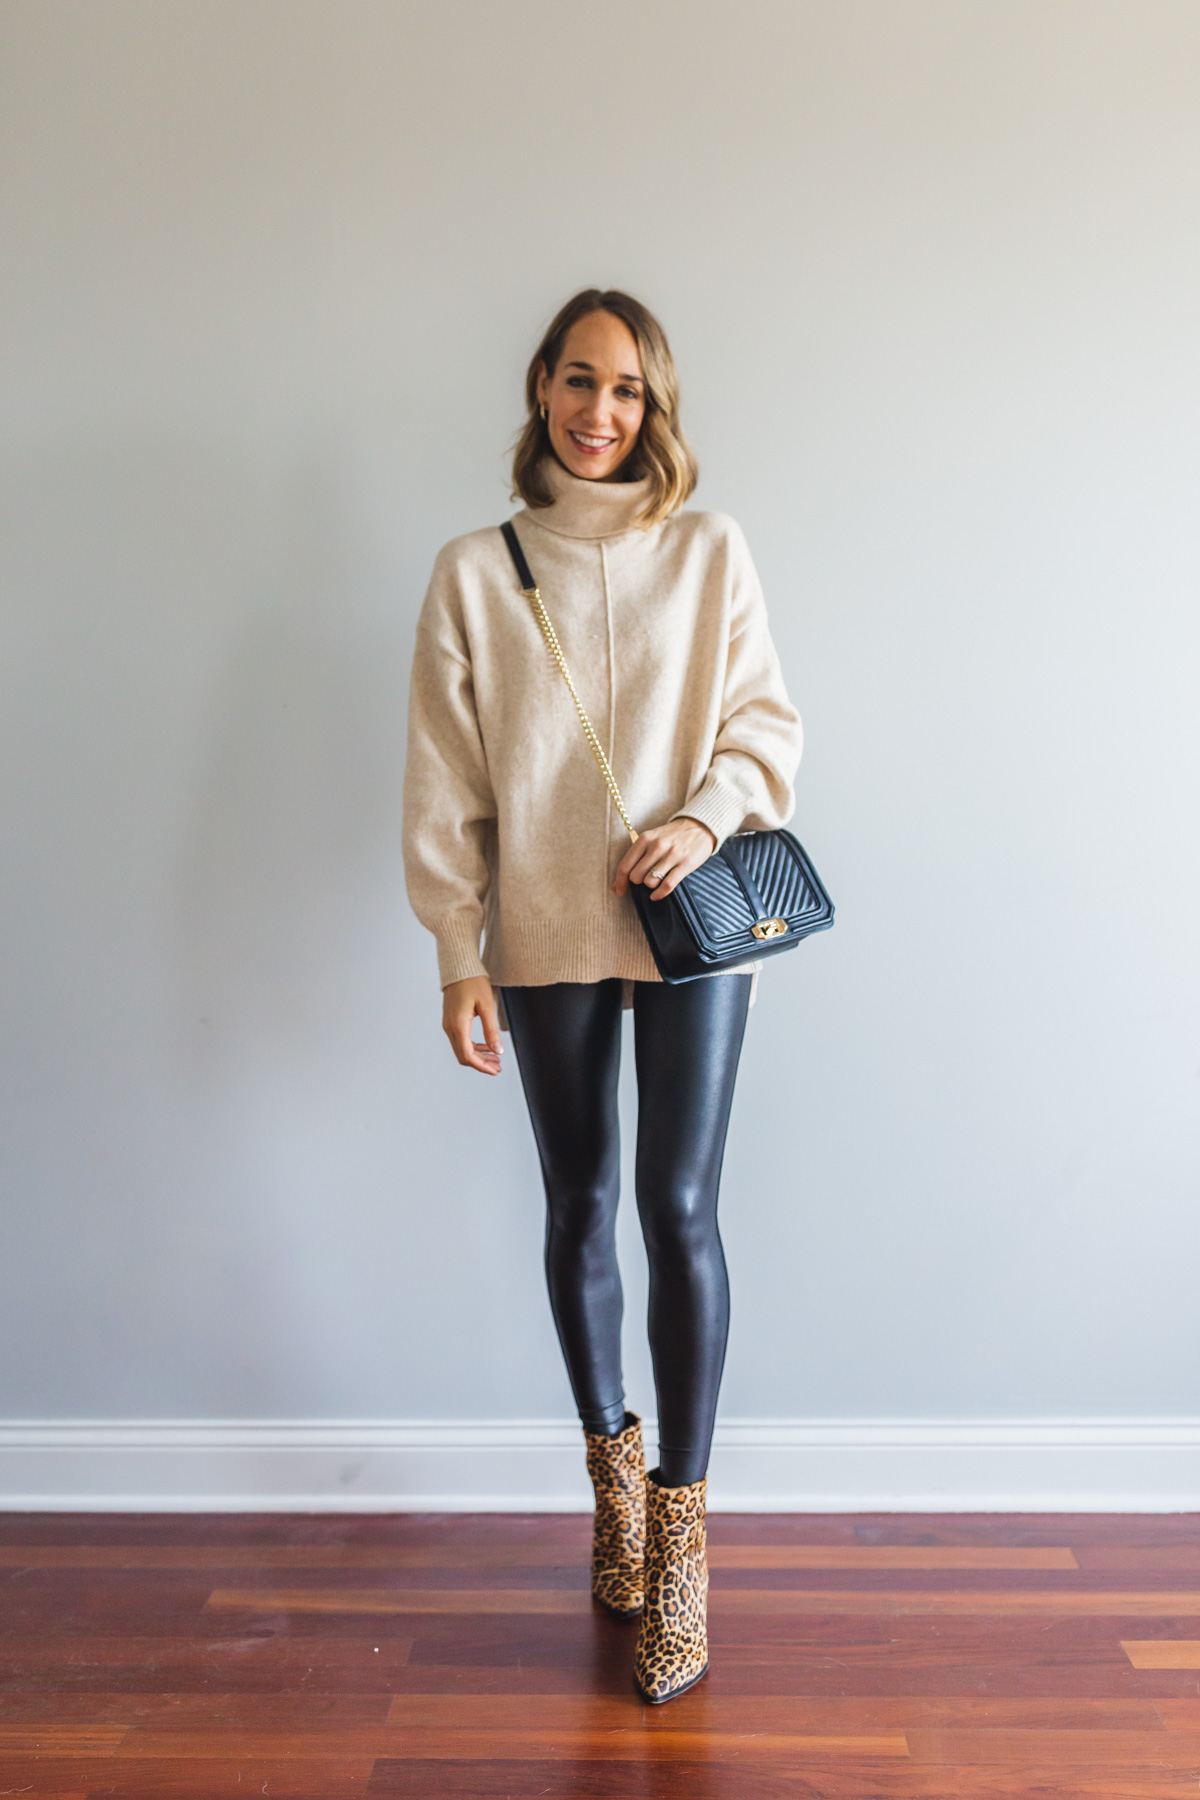 How To Dress Up Spanx Leggings